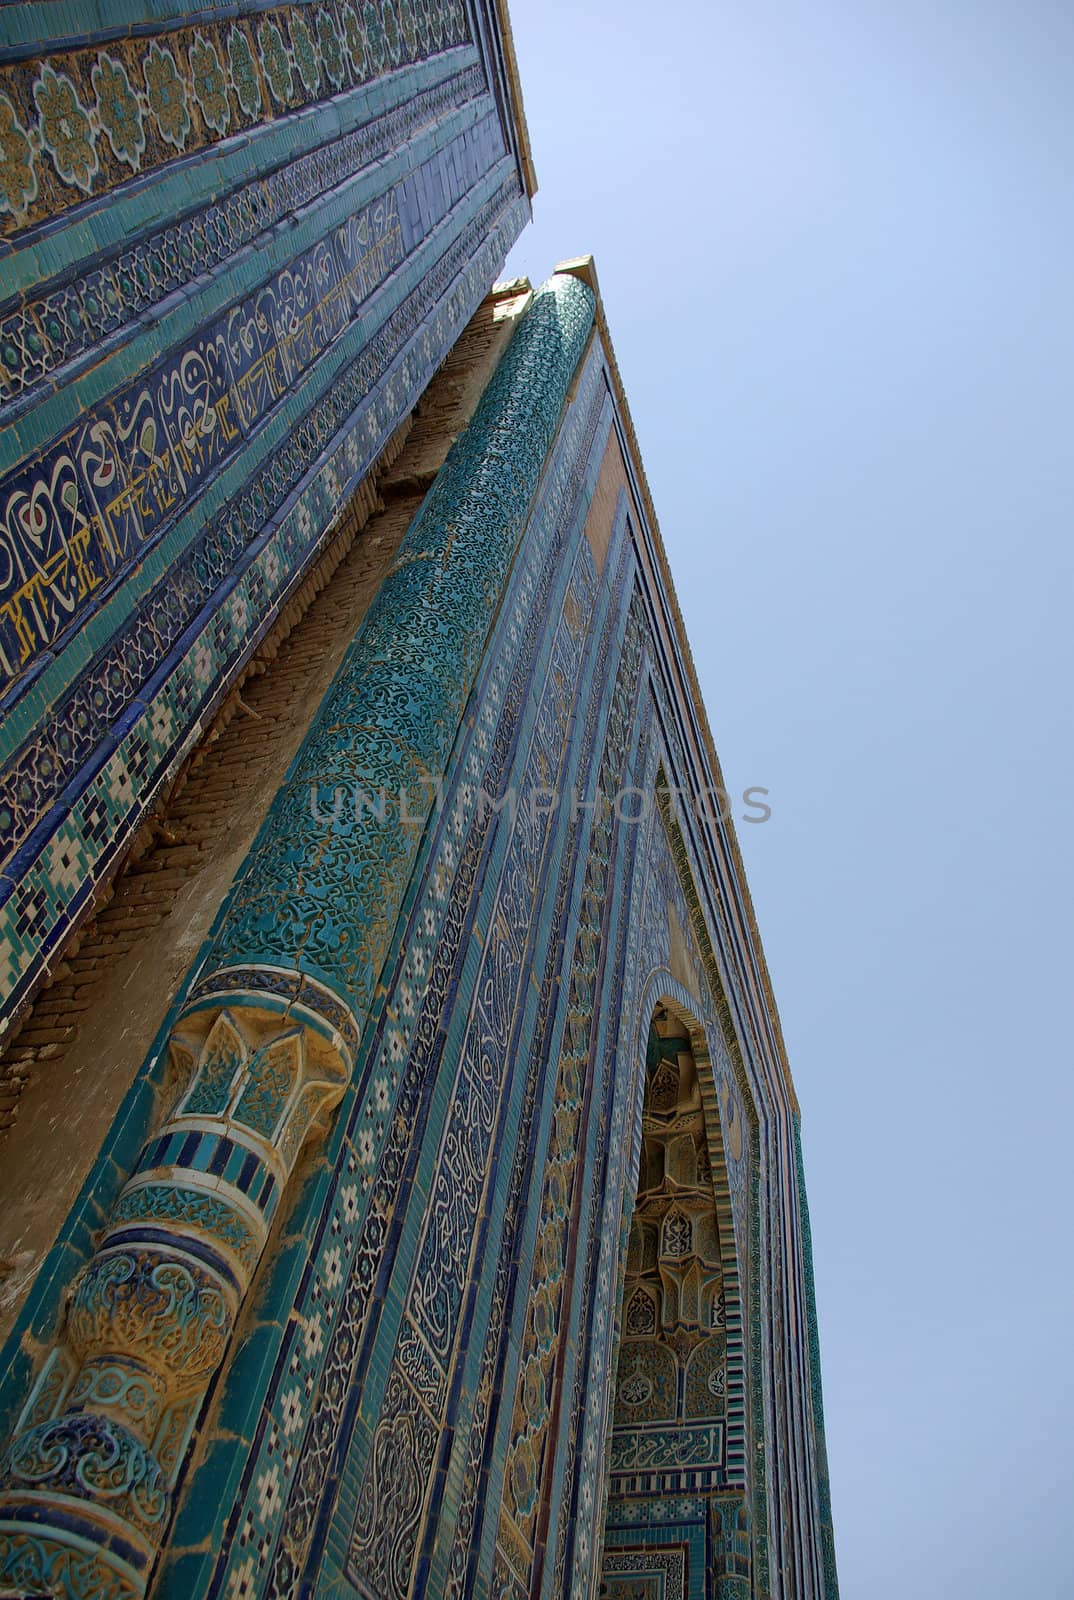 Middle East mausoleum facade by Shpinat